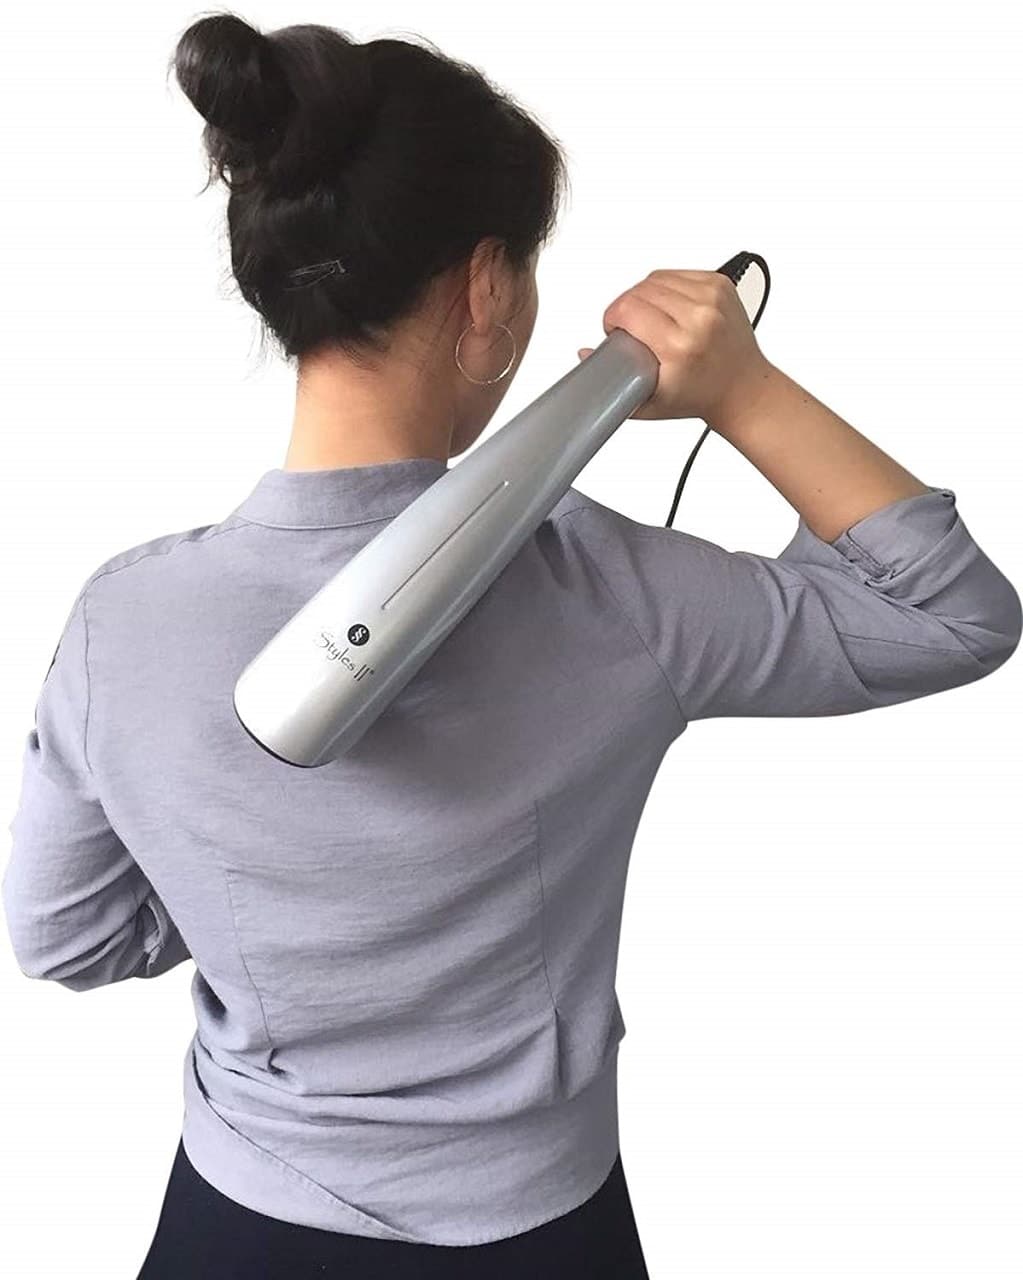 ss styles II percussion massager image